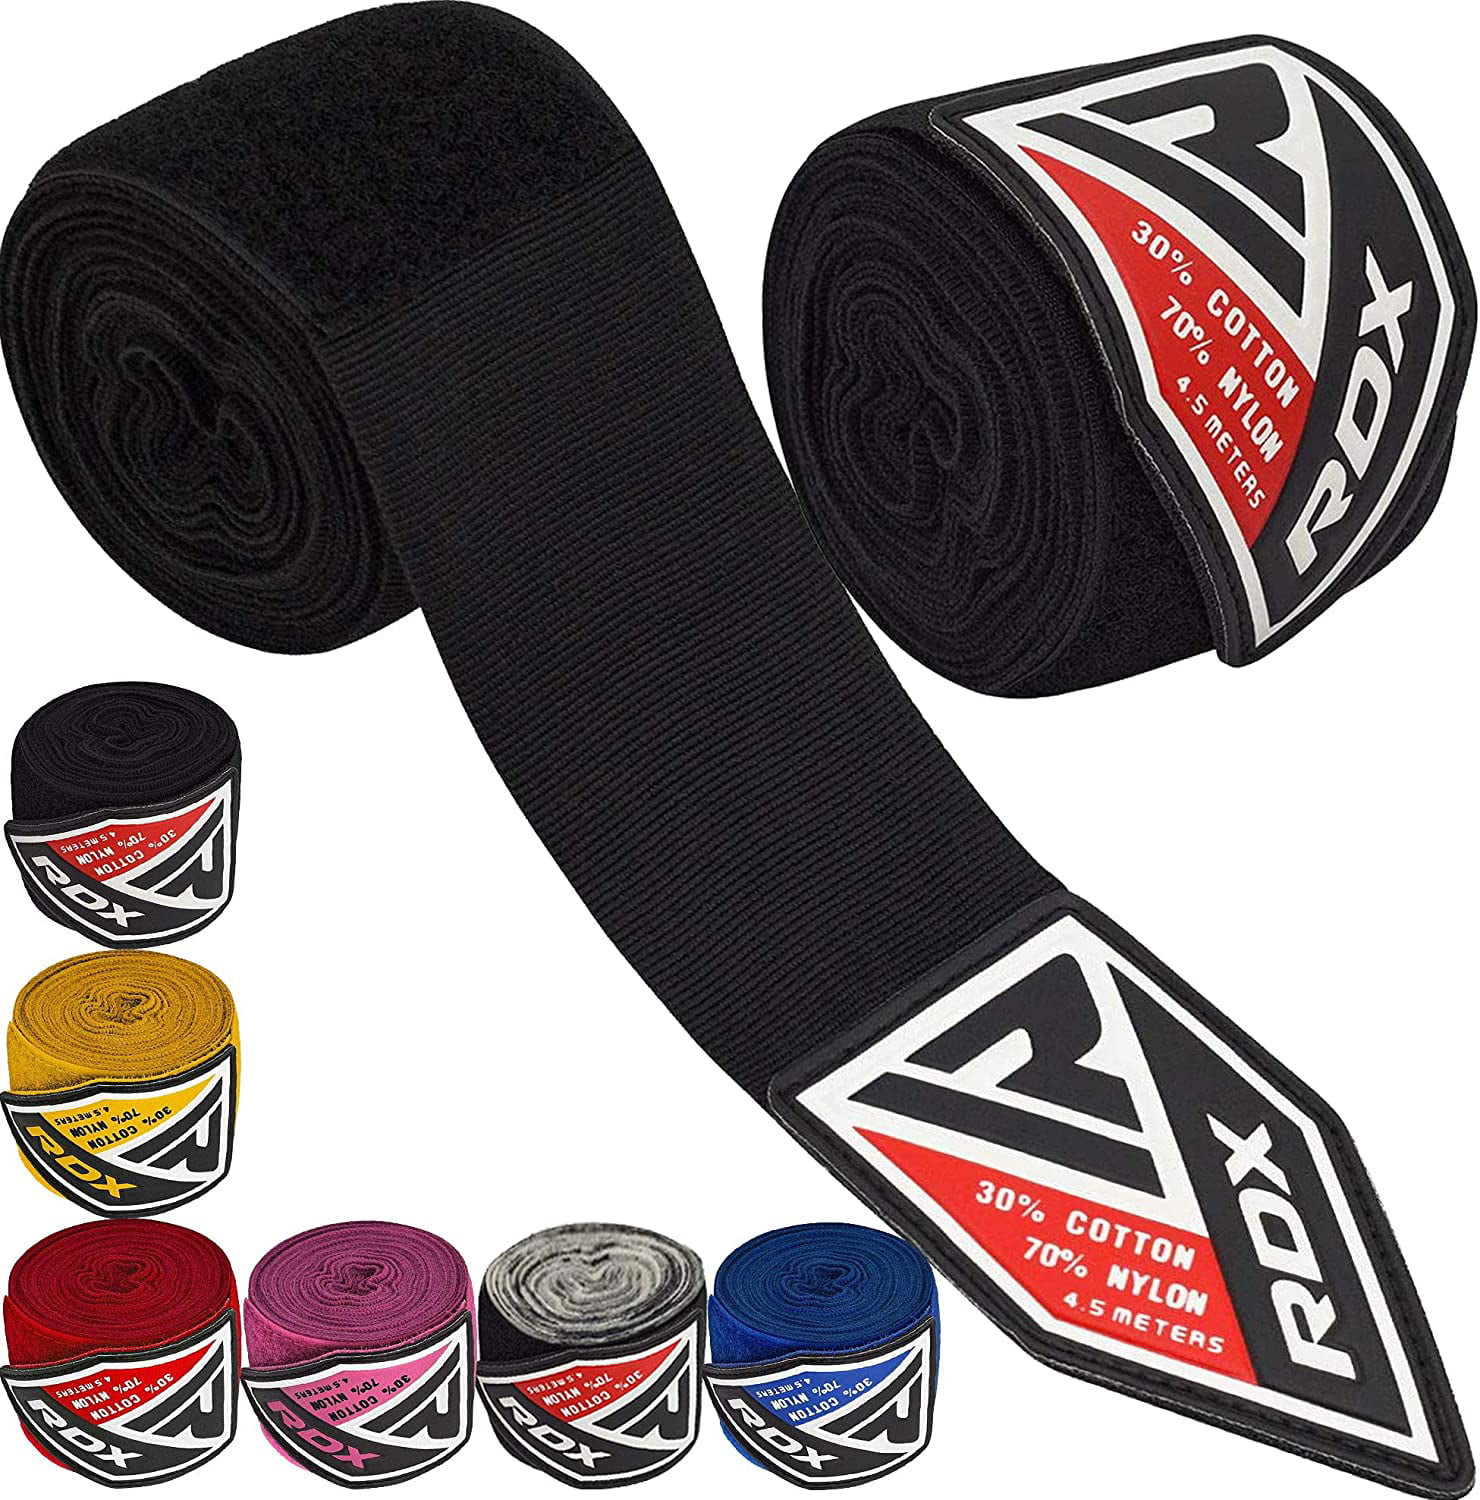 Boxing Hand Wraps Training Muay Thai Punch Bag Inner Gloves Protector Bandages 